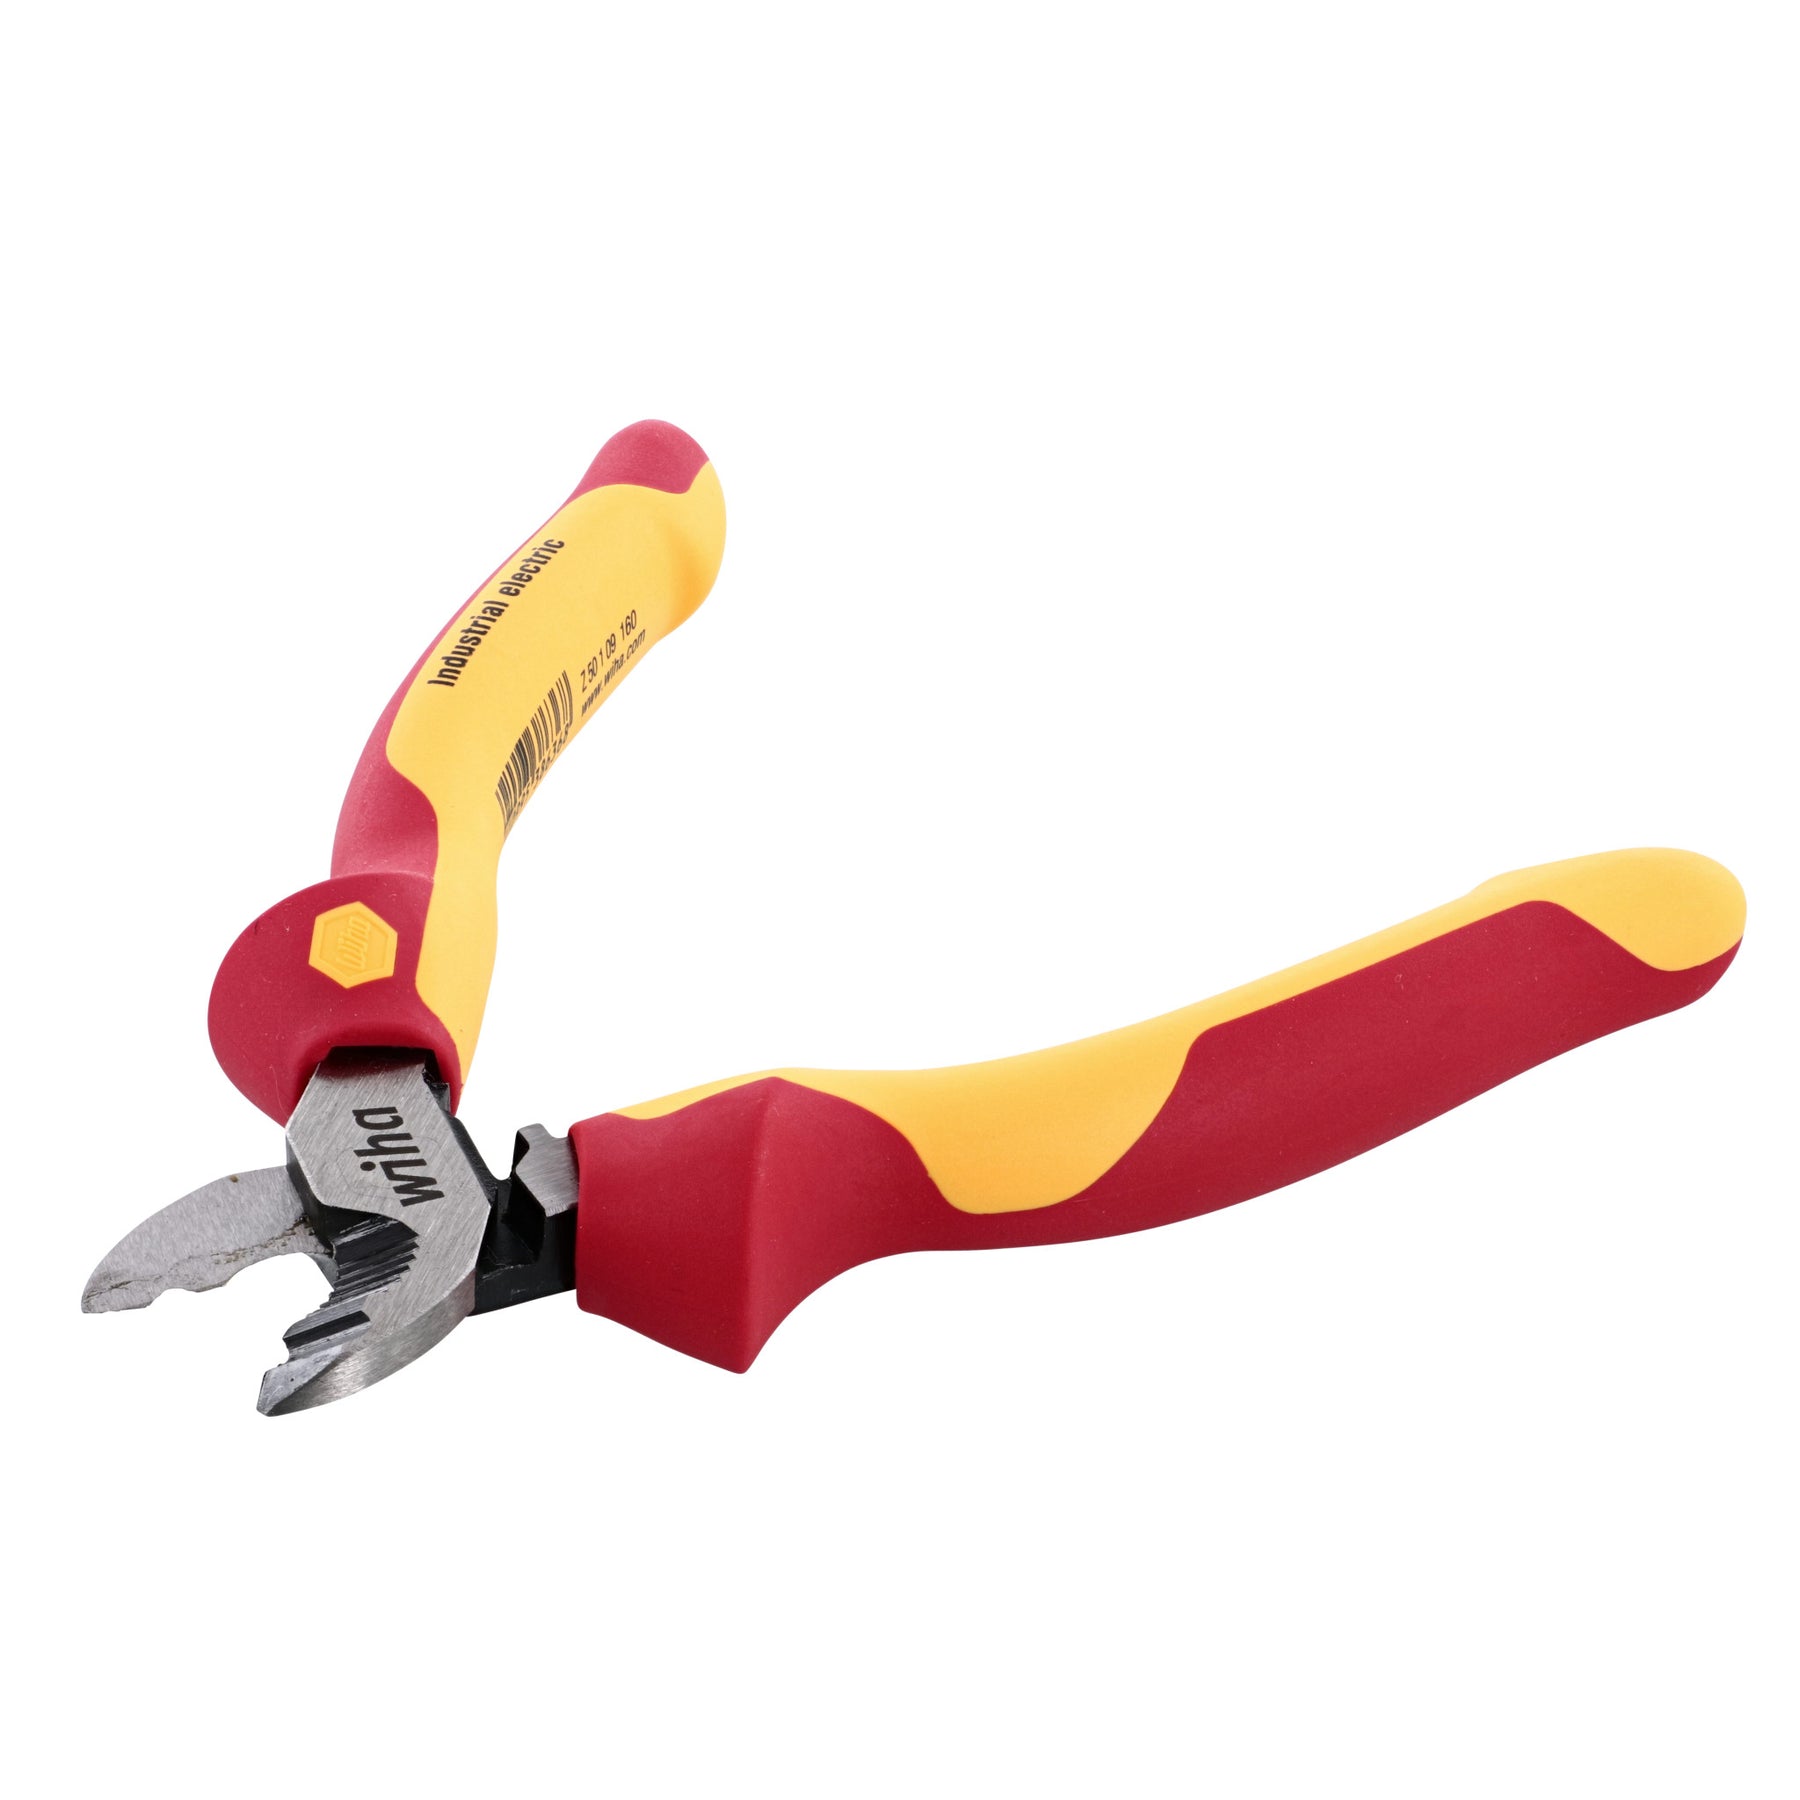 Insulated Serrated Edge Cable Cutters 6.3"